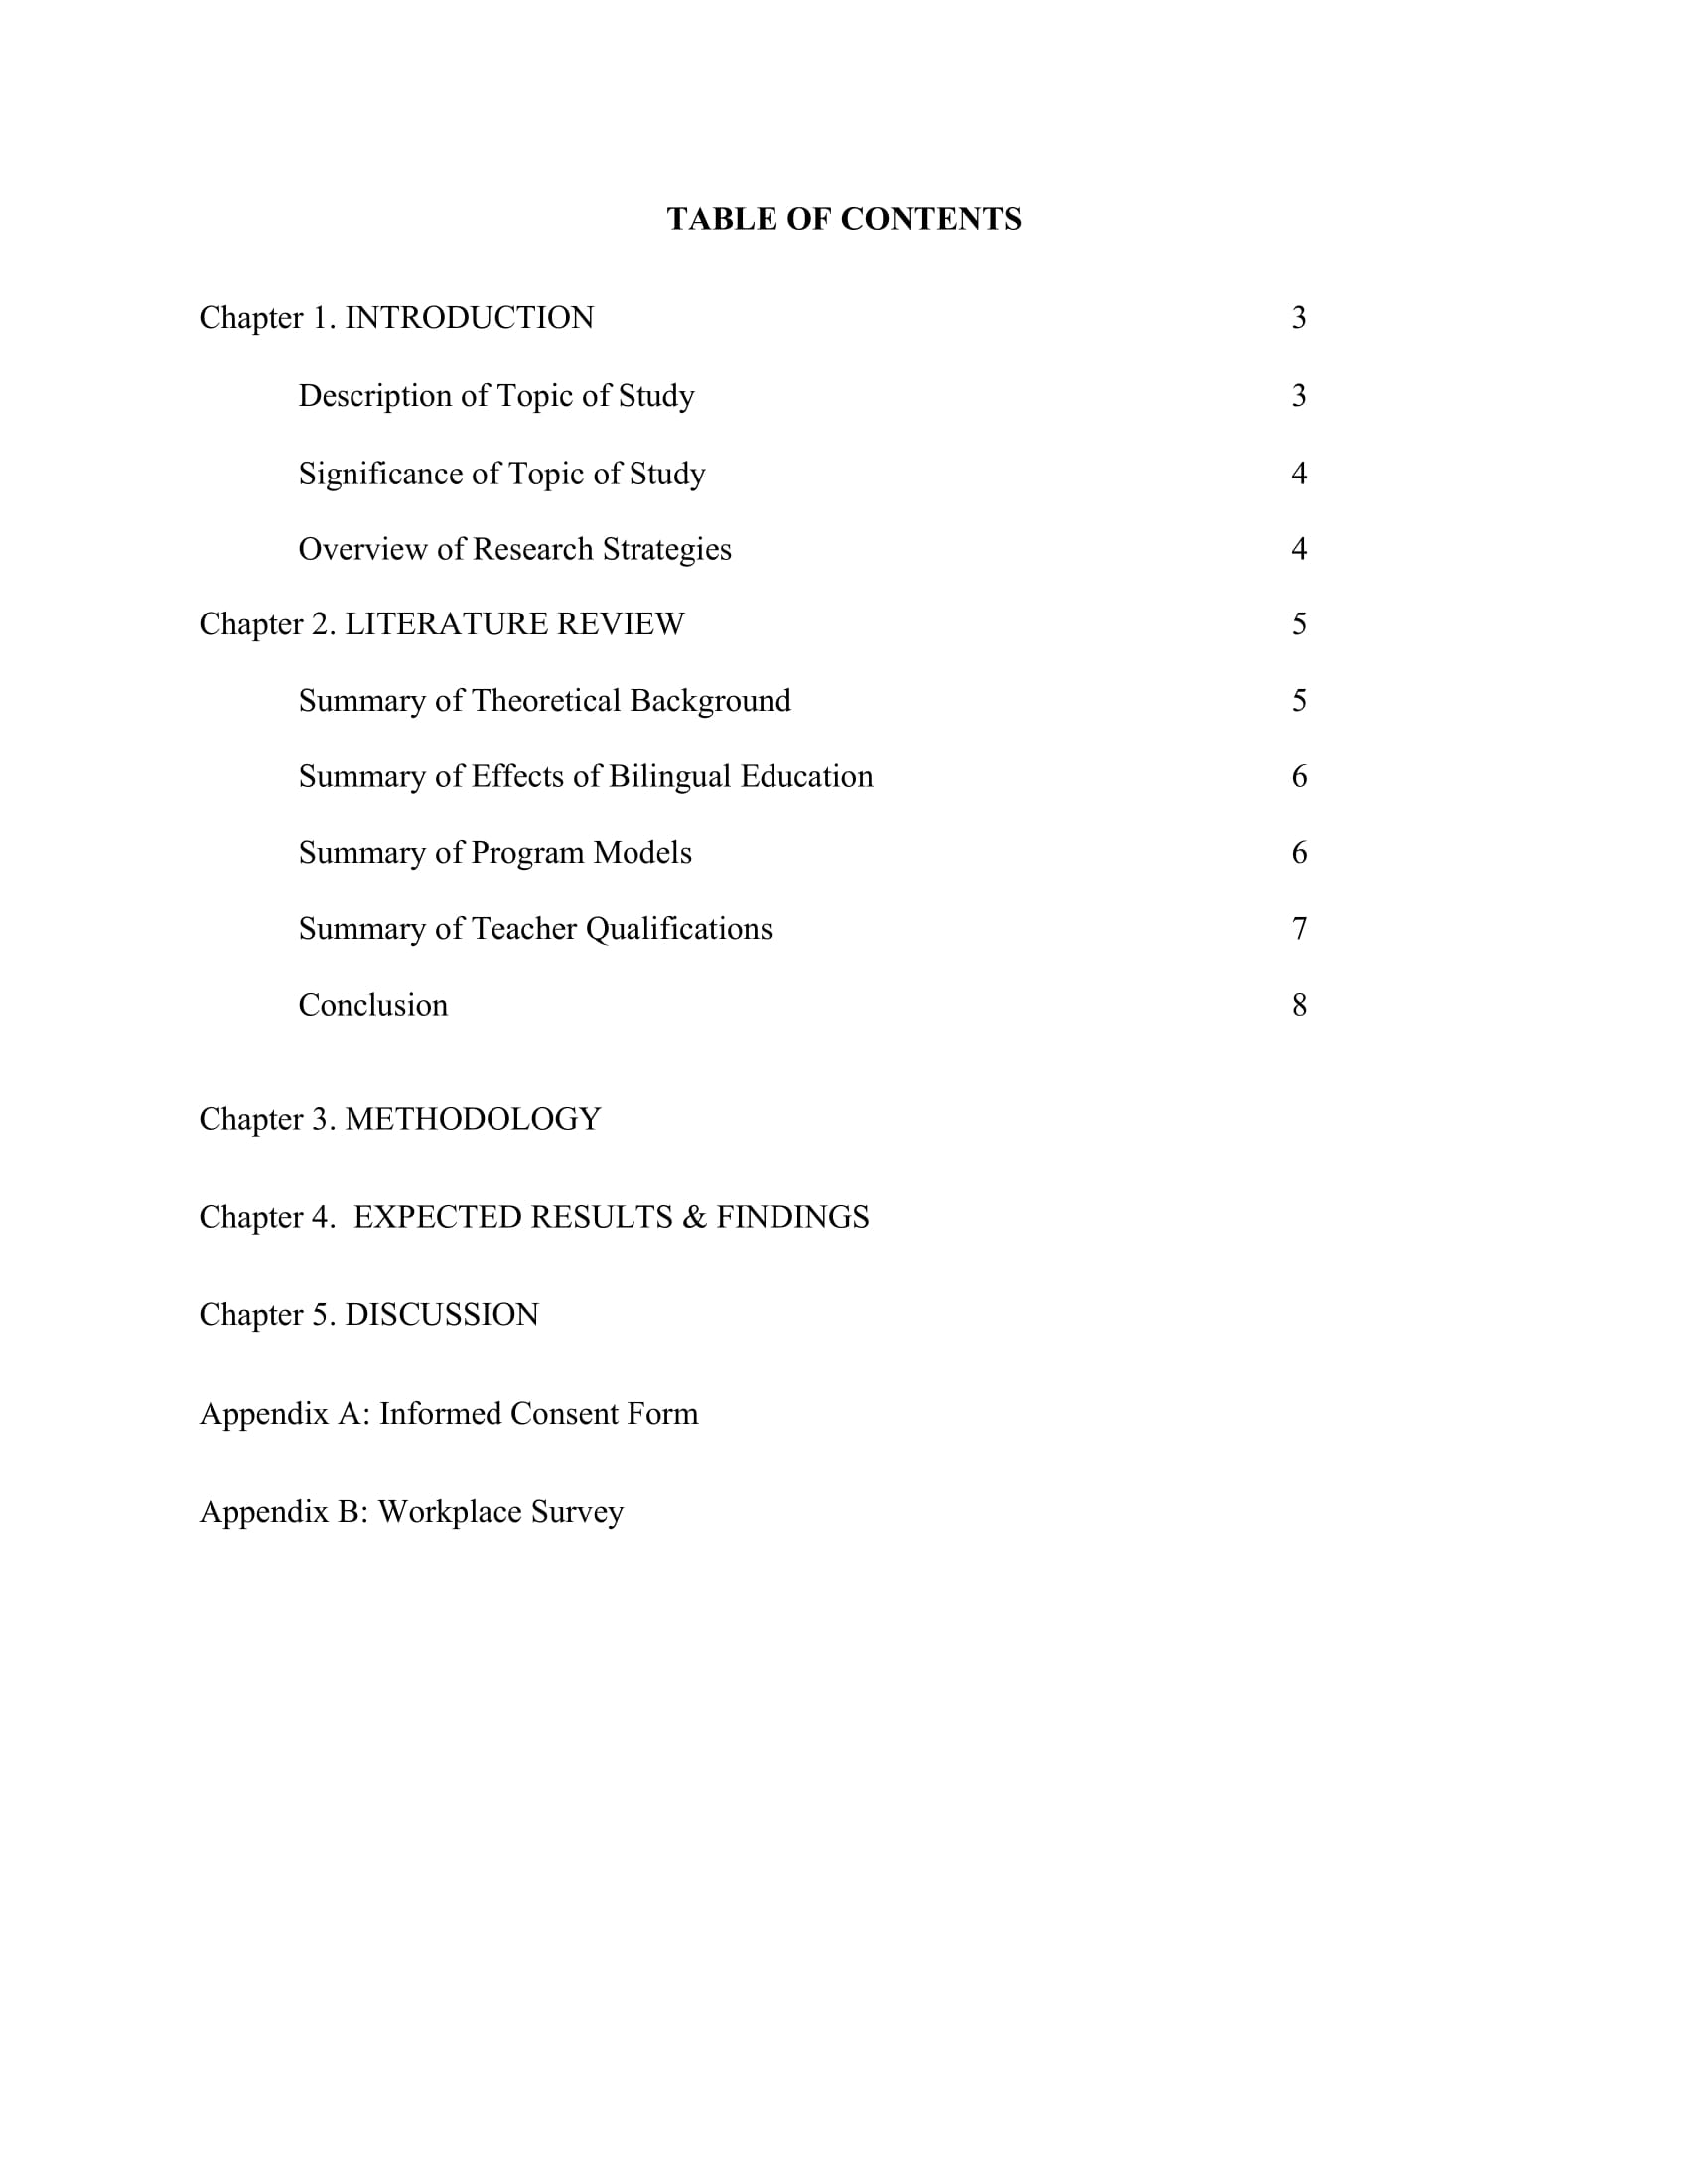 contents page for dissertation